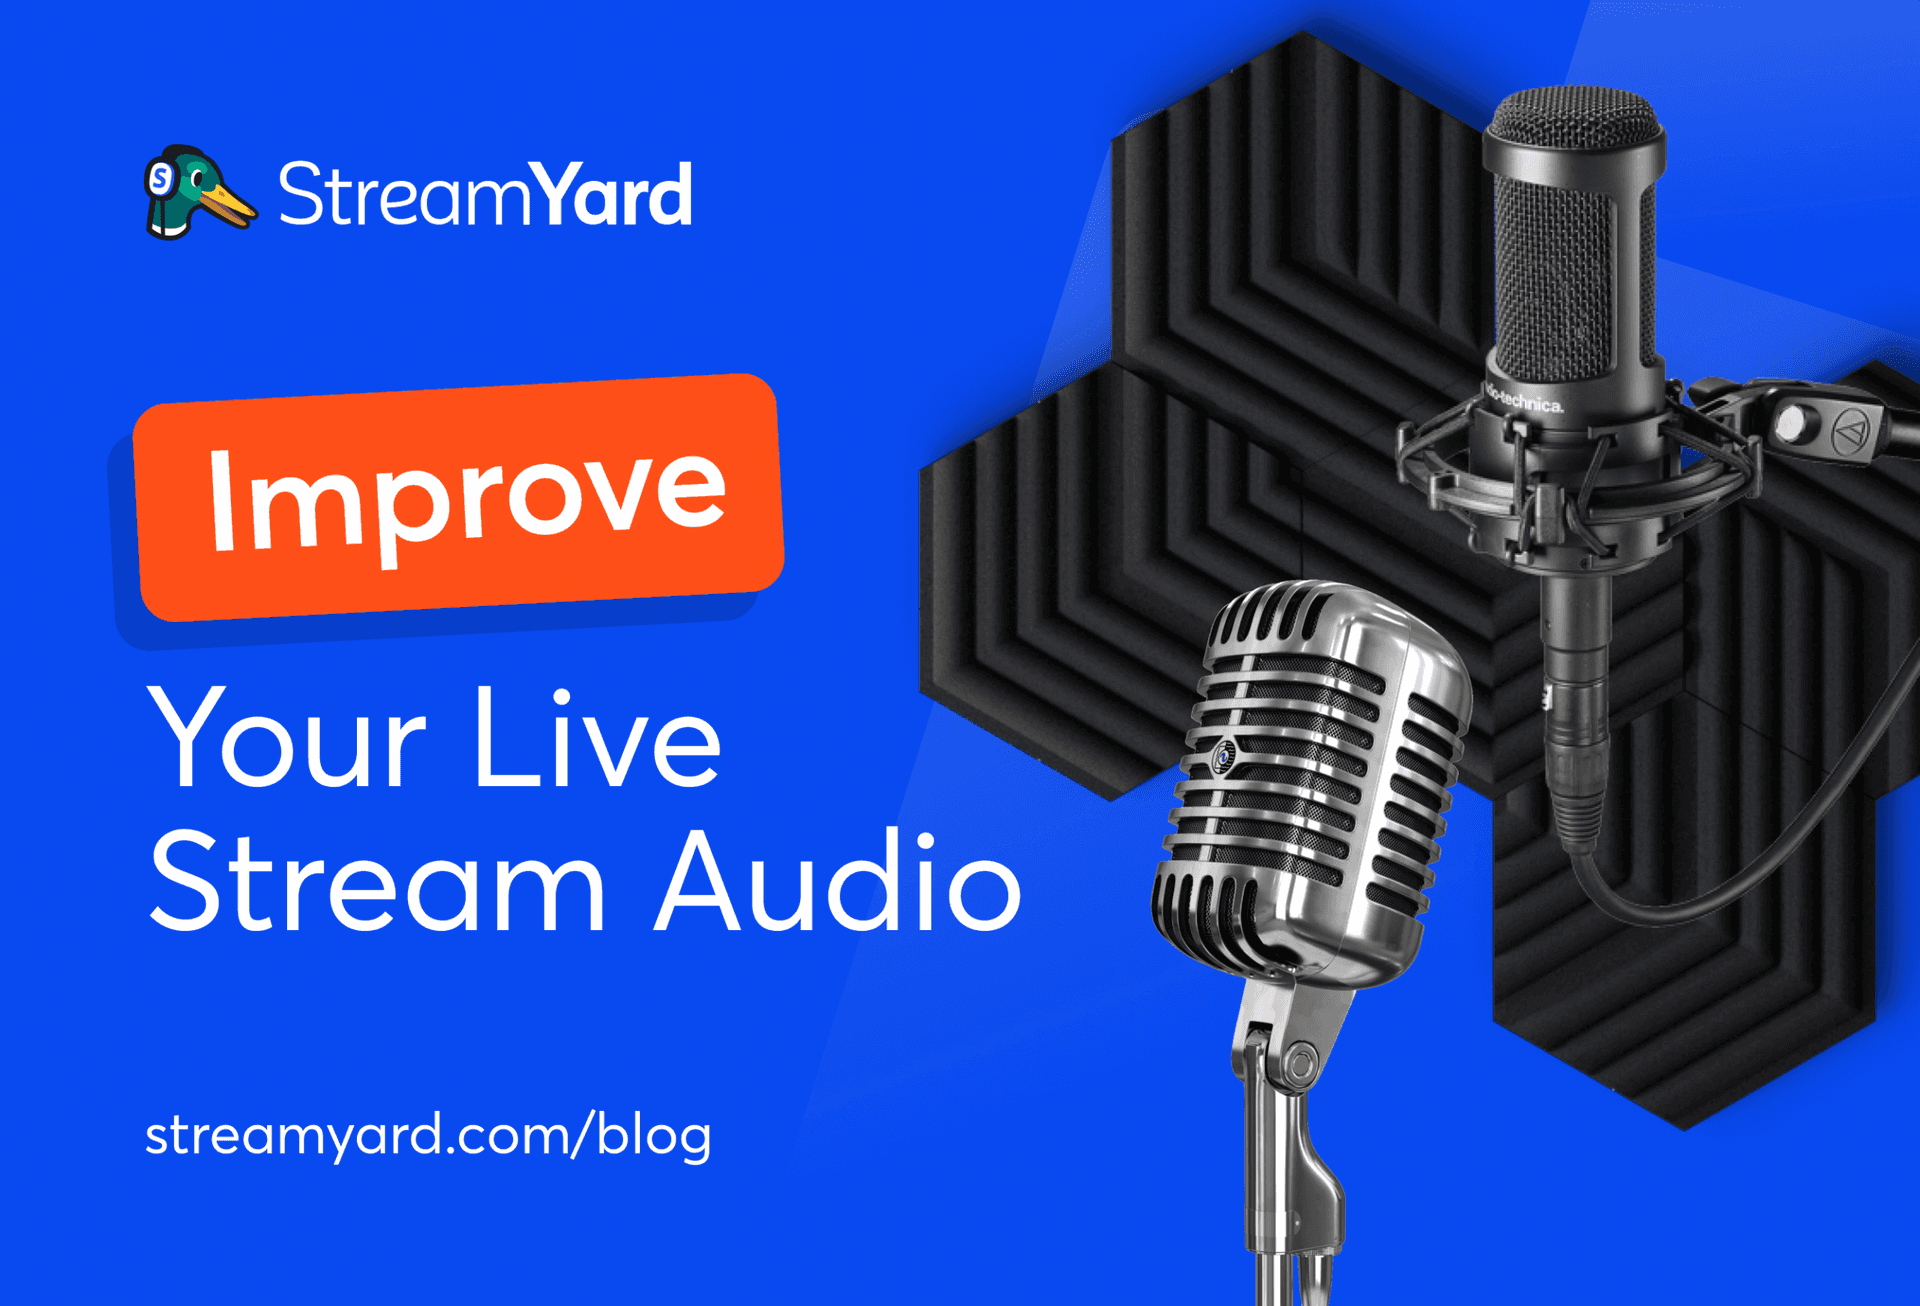 Here are seven simple ways to ways to improve live stream audio. Follow these pro tips and tricks to make your live streams sound great.